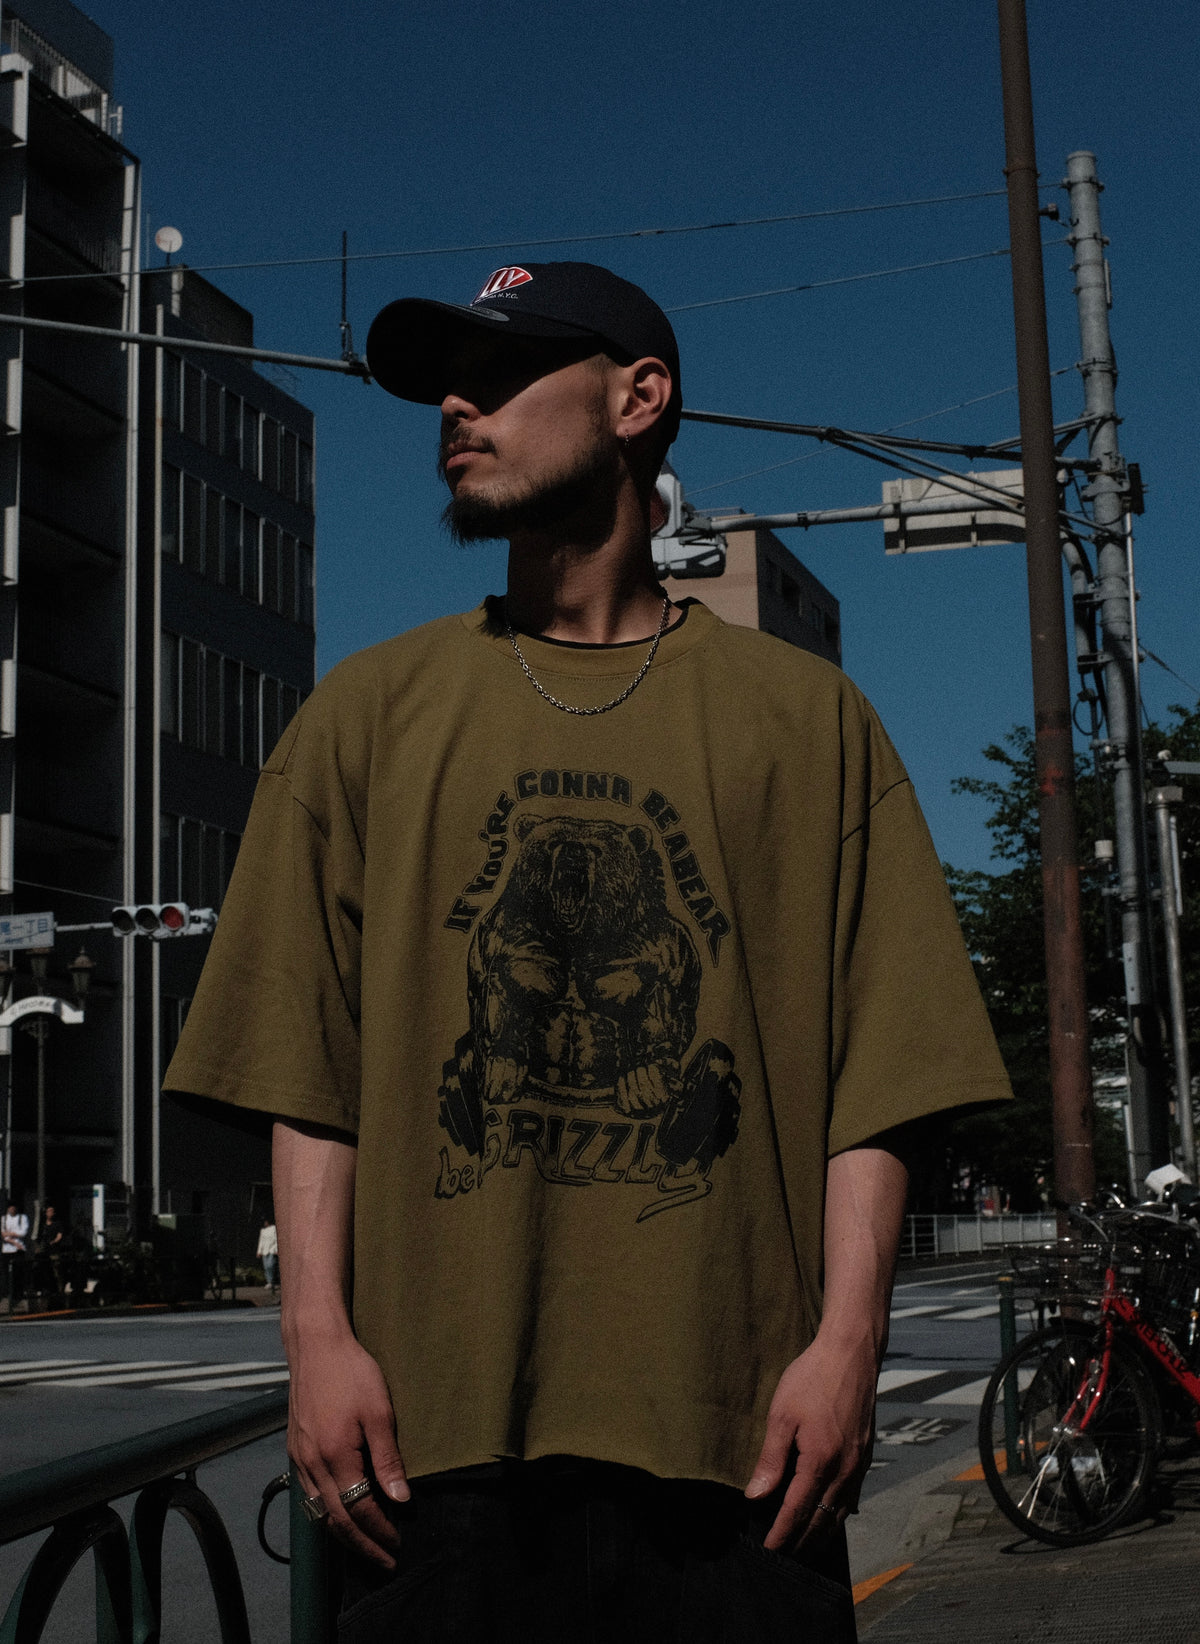 <span style="color: #f50b0b;">Last One</span> Y,IWO / Strong Cropped Tees Grizzly Army Green